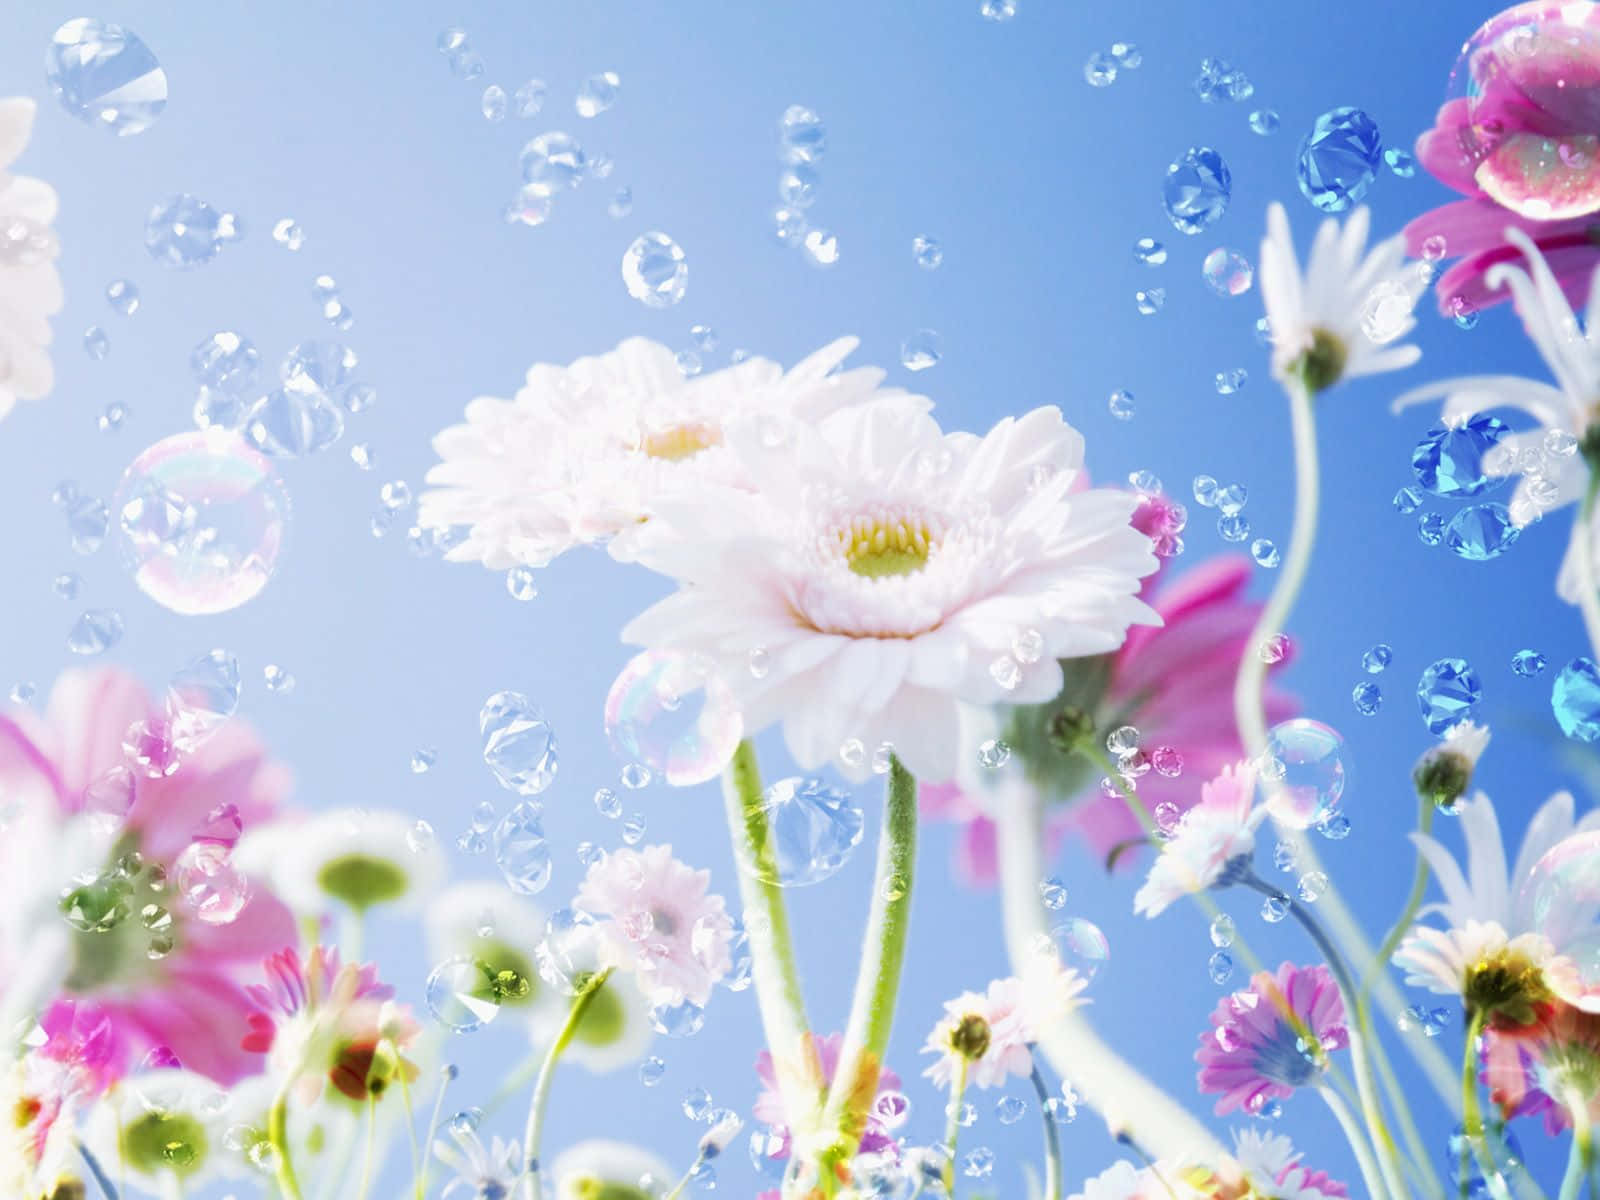 flowers and bubbles in the sky Wallpaper